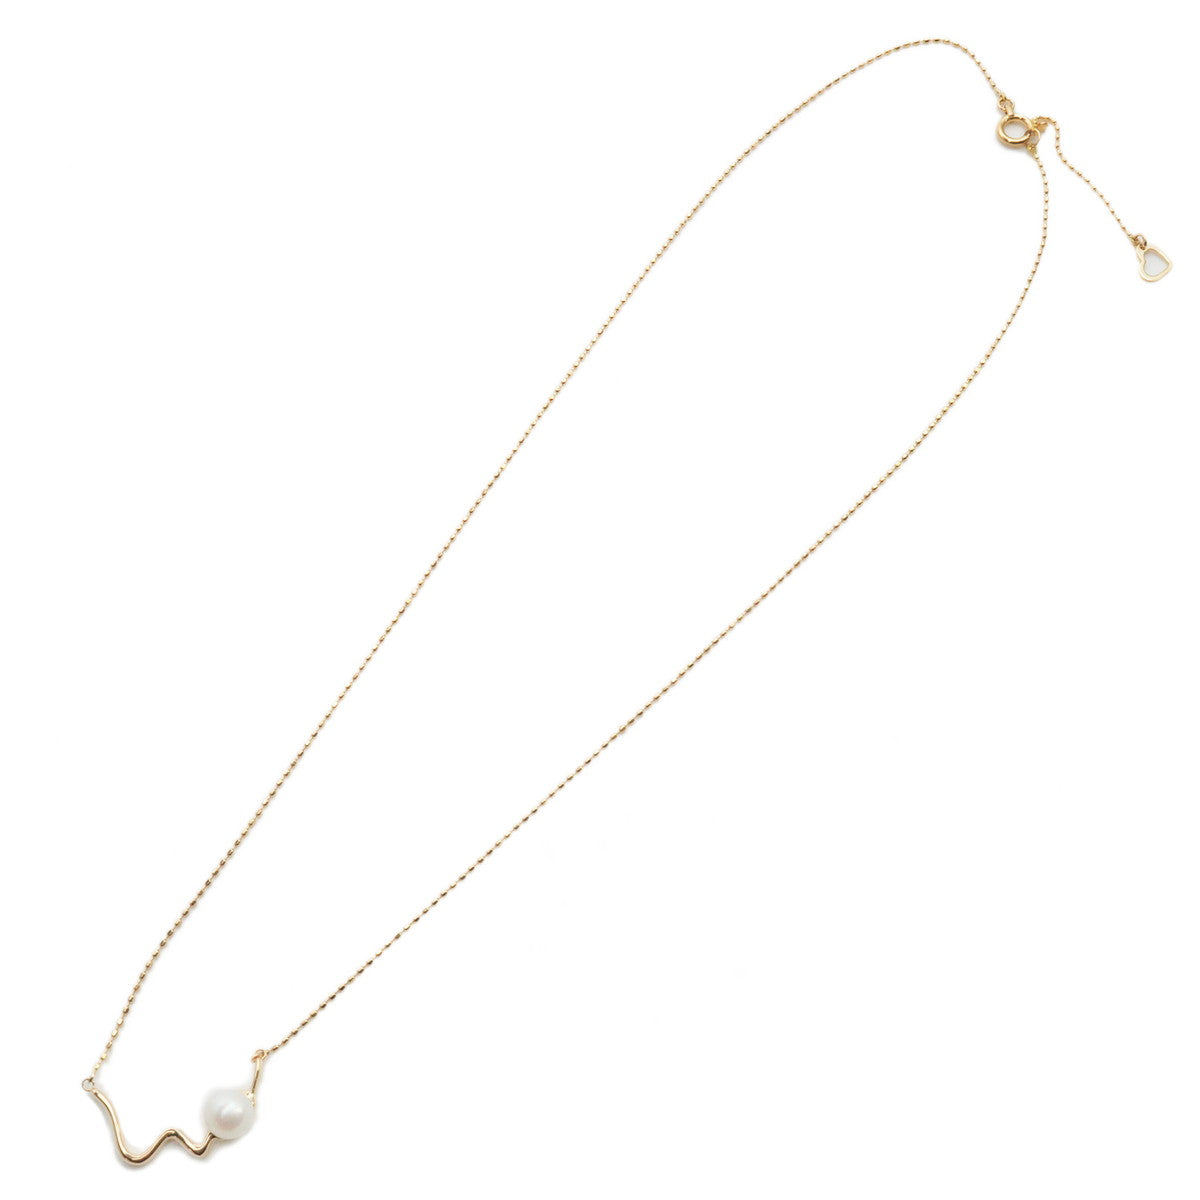 Ponte Vecchio Pearl Necklace K18 750 Yellow Gold 5.1mm Pearl